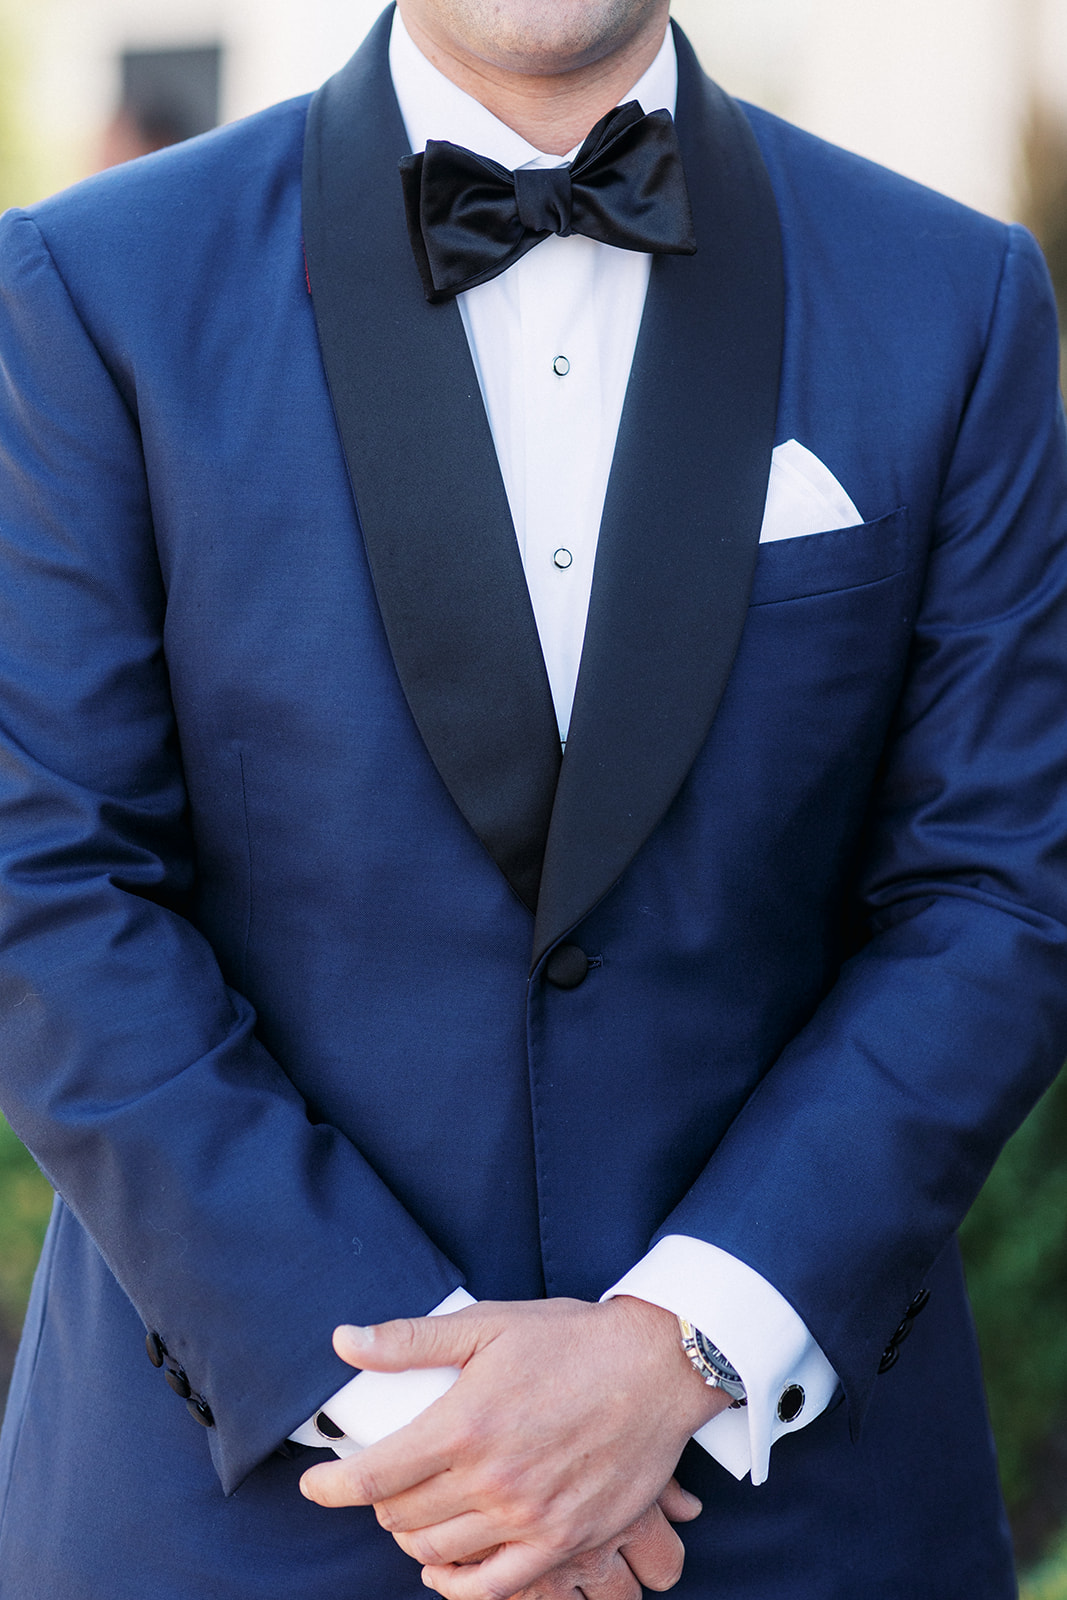 Details of a groom wearing a blue tuxedo jacket with a black bowtie